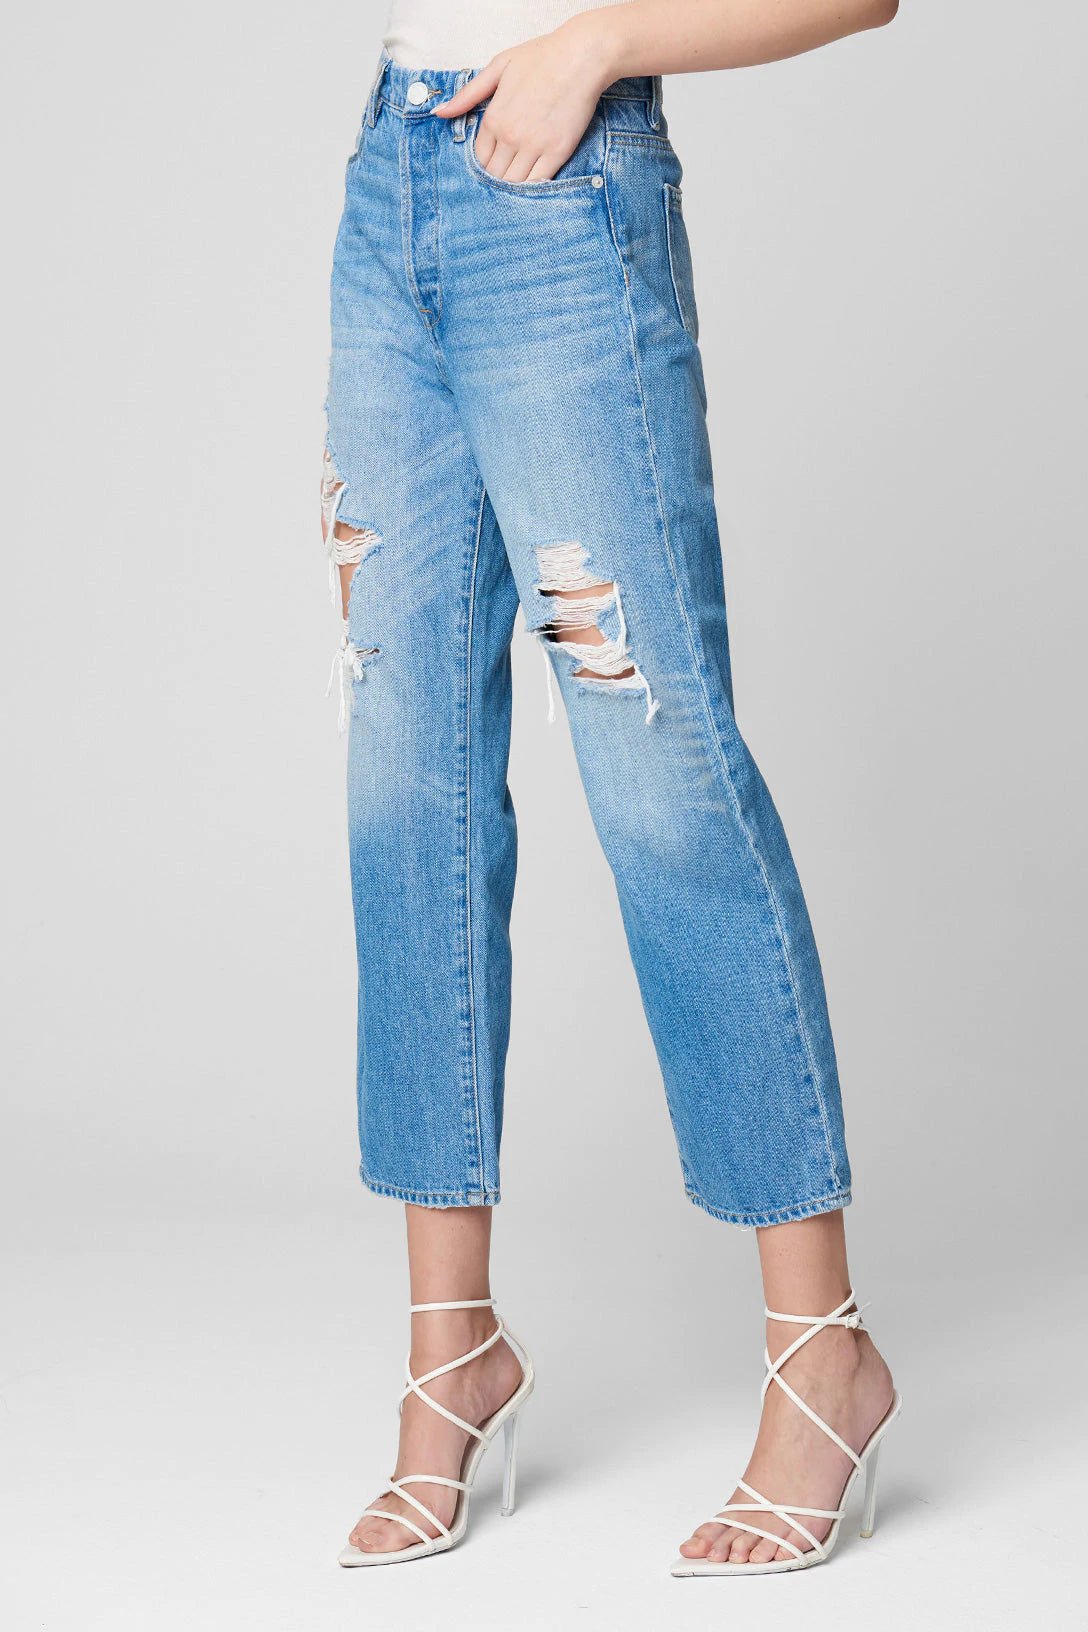 Blank NYC Baxter Ribcage Straight Leg in Loosen UpJeans